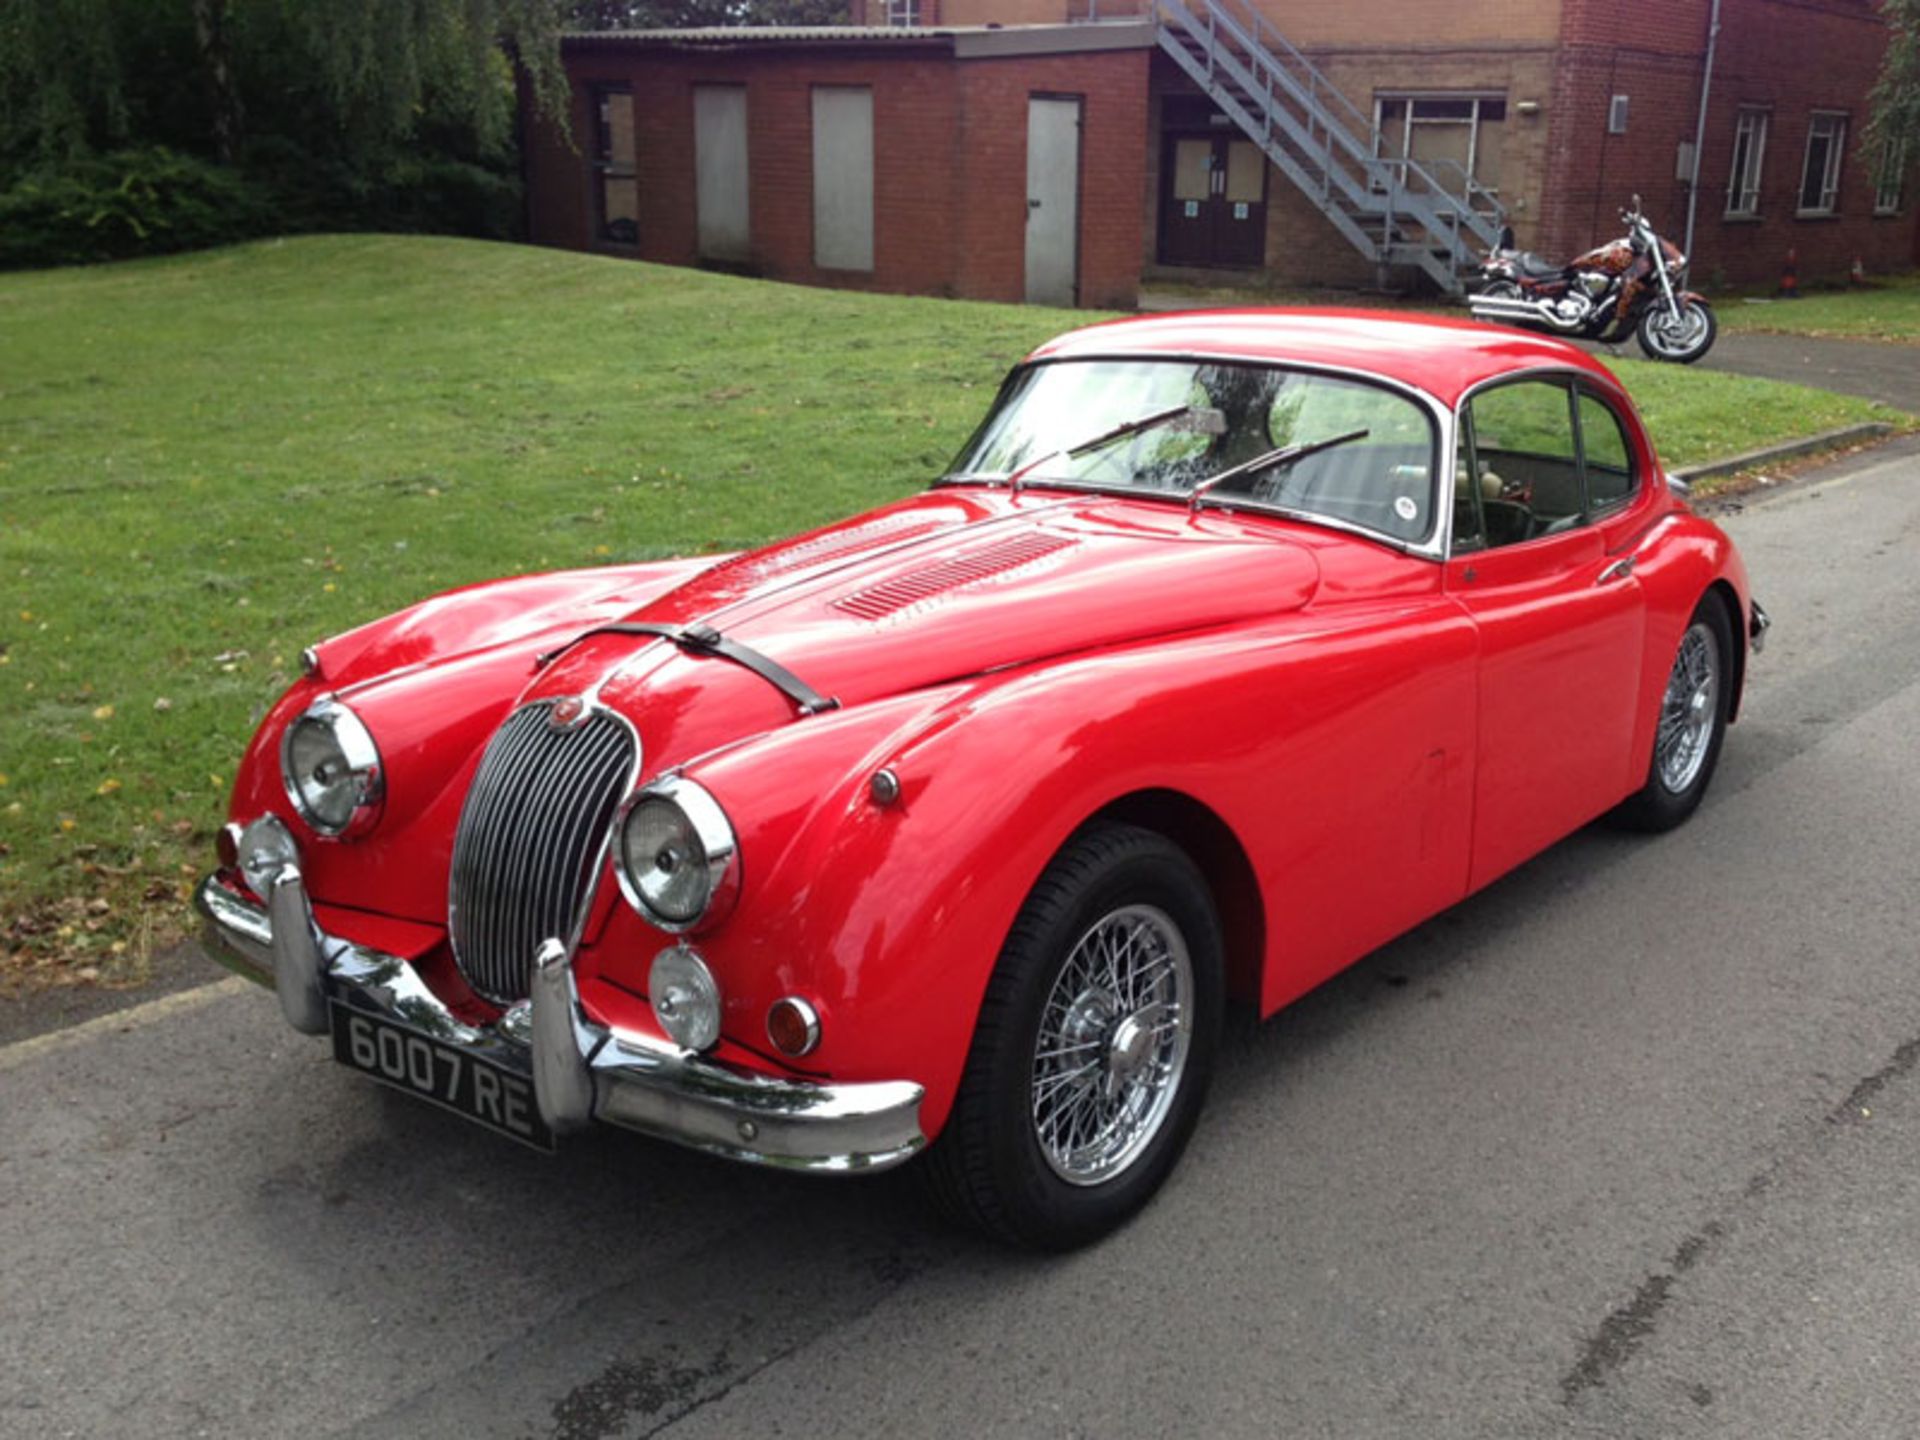 For many the ultimate XK150 variant, the 3.8 litre S model became available in late 1959. Topped